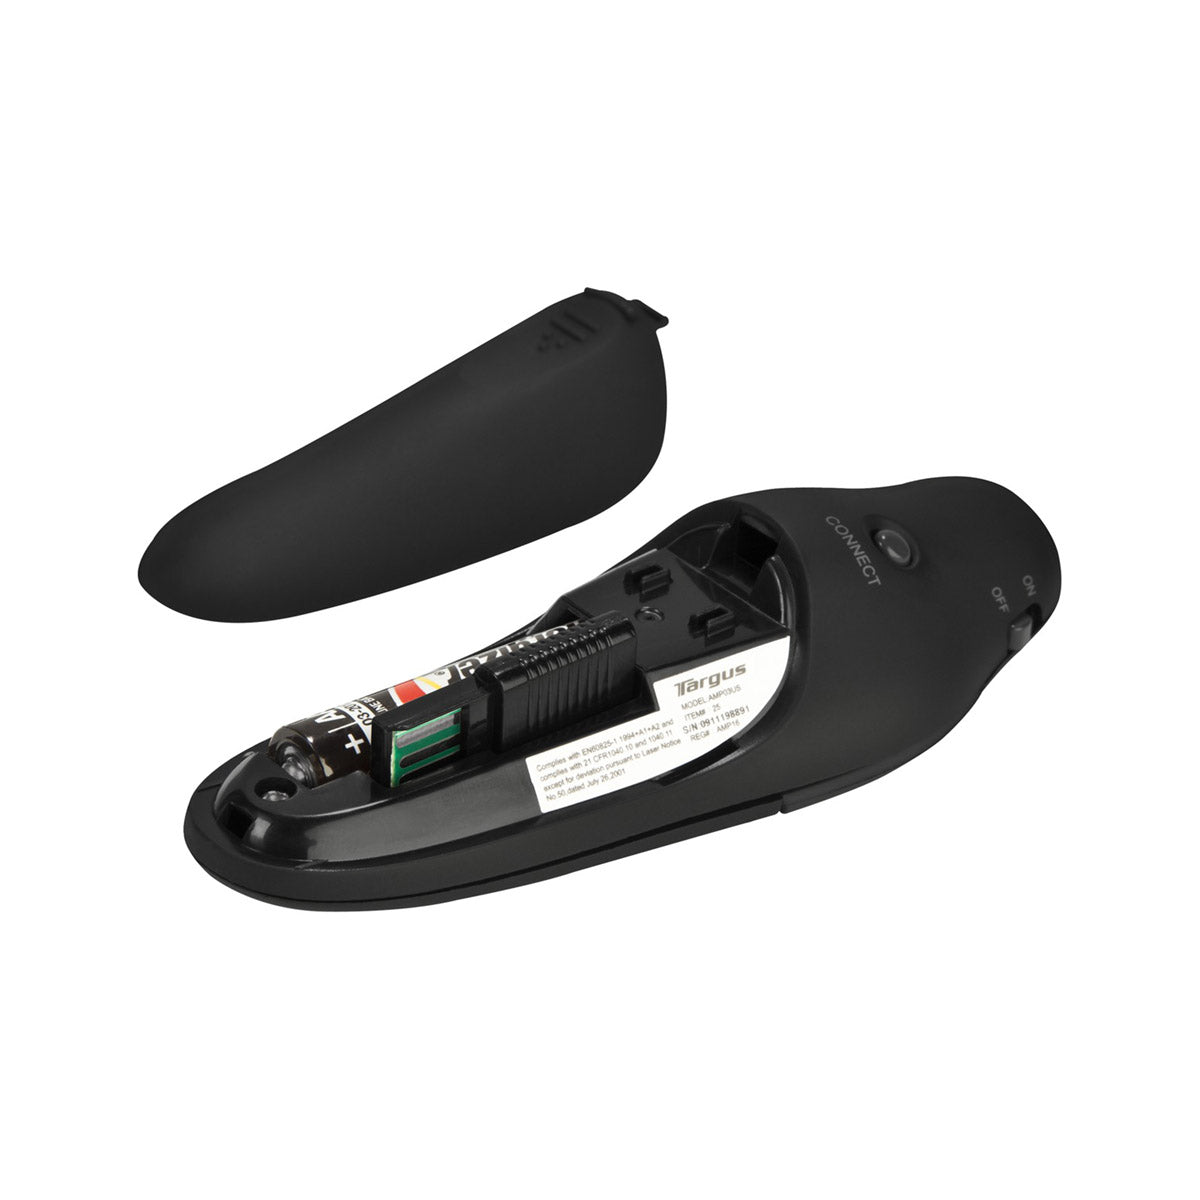 Targus P16 Wireless Presenter with Laser Pointer w/Soft-touch Material 無線簡報遙控器